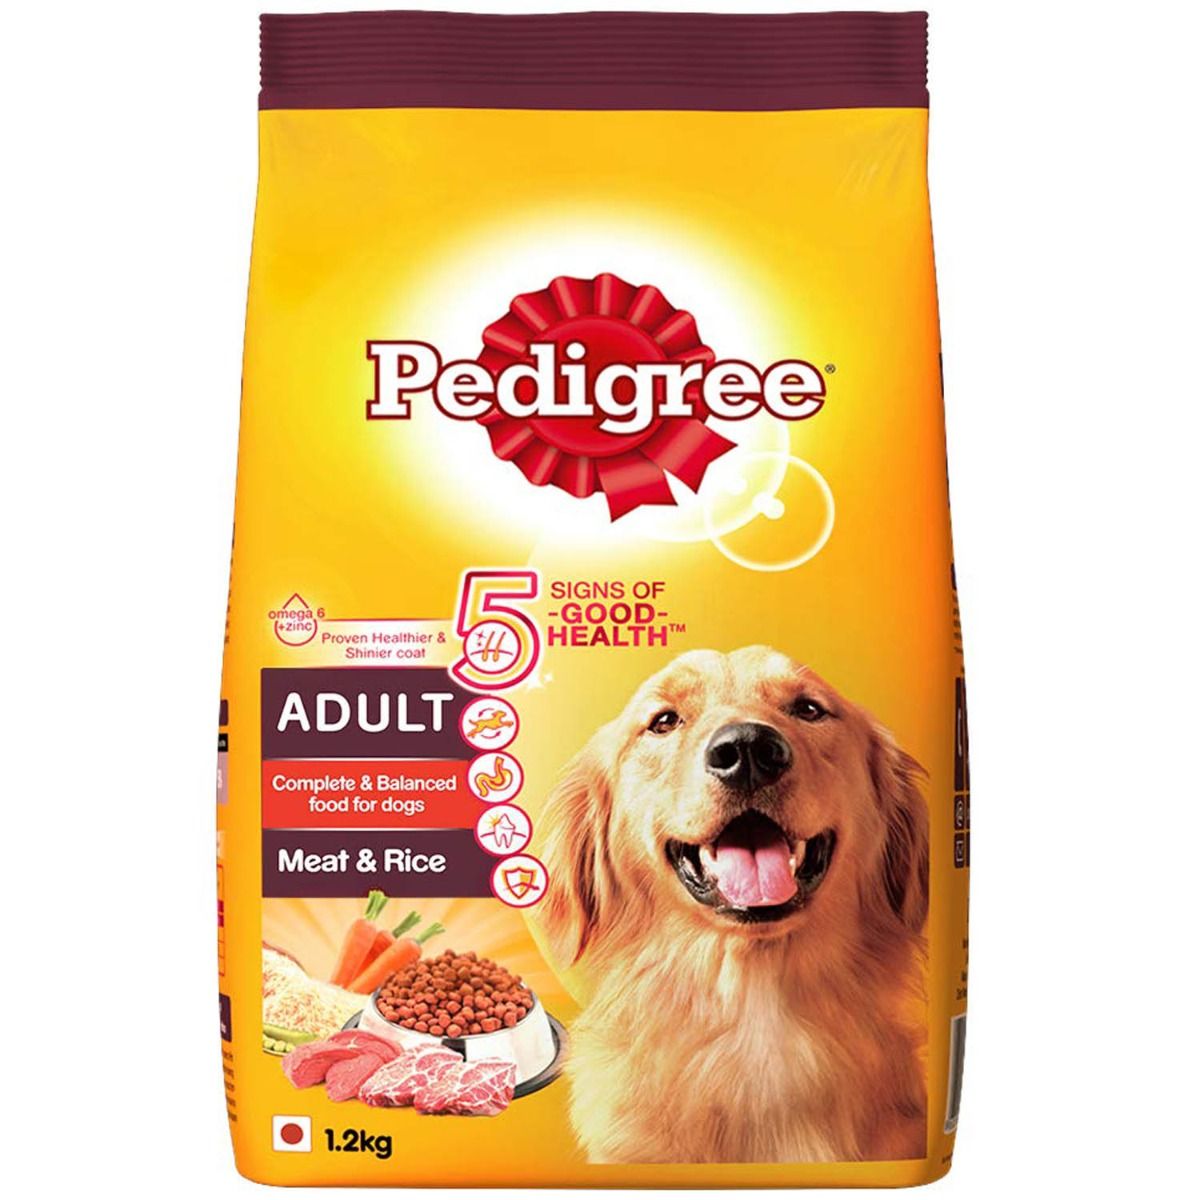 Buy Pedigree Adult Dog Food With Meat & Rice, 1.2 kg Online